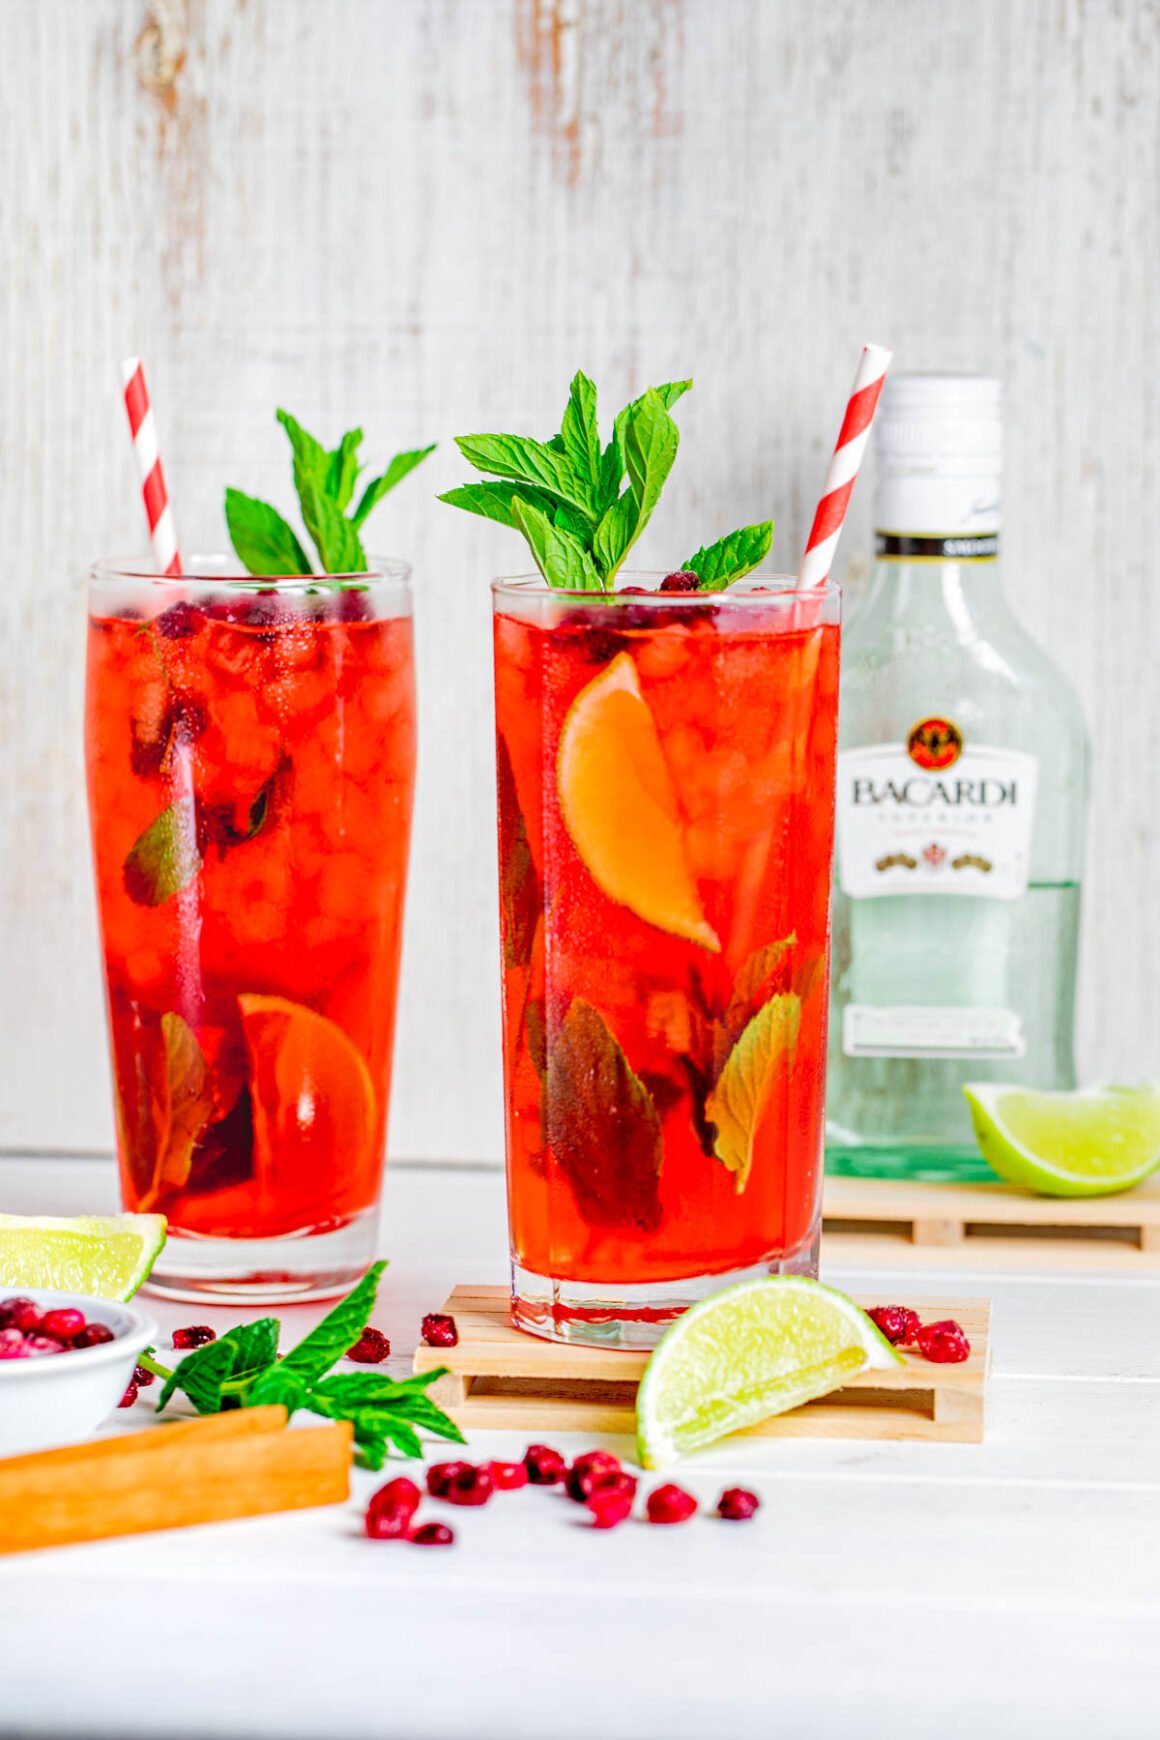 Pomegranate Mojito is a stunning twist recipe of the Classic Mojito, is colorful as well as refreshing, it’s the perfect cocktail for that special event with family and friends!

